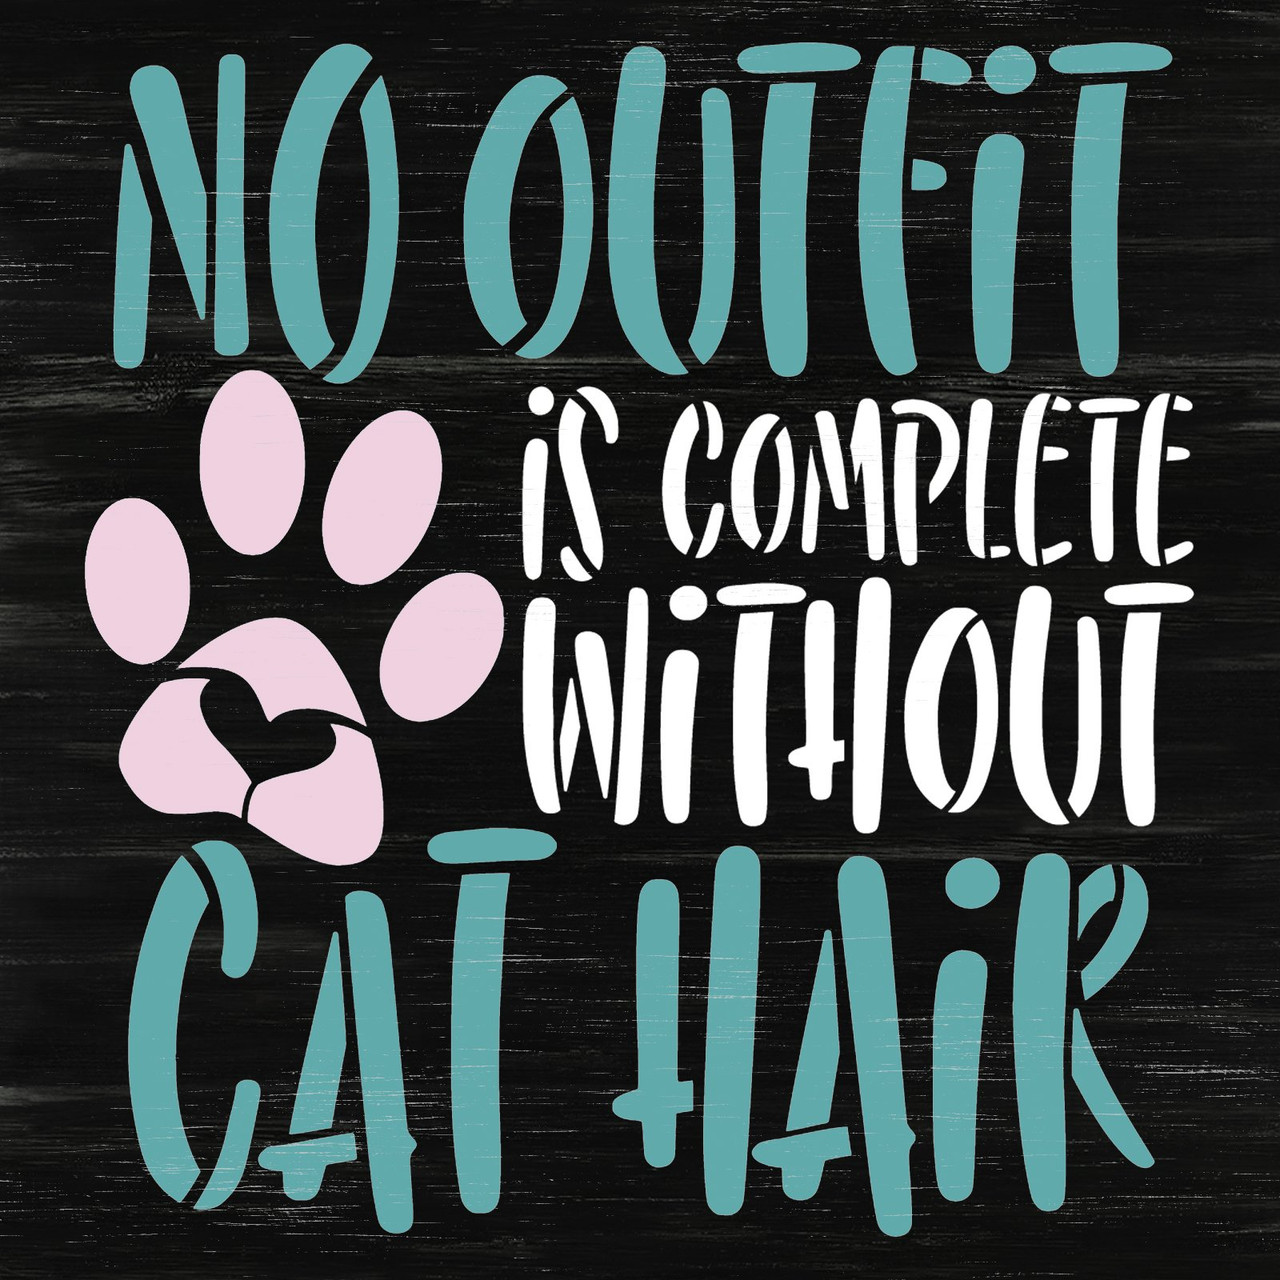 No Outfit Complete Without Cat Hair Stencil by StudioR12 | Craft DIY Pawprint Heart Home Decor | Paint Wood Sign Reusable Template | Select Size